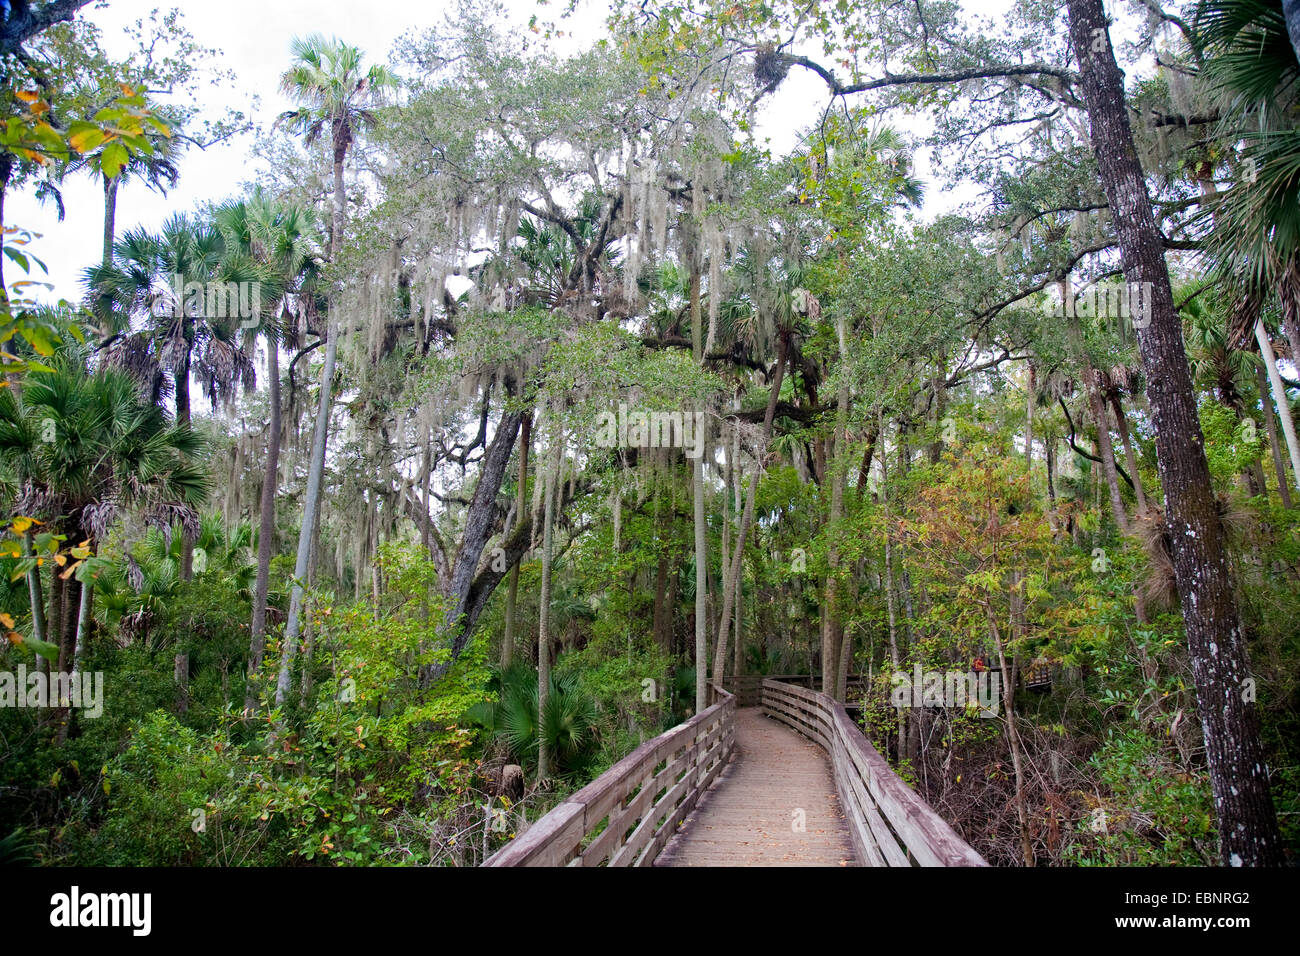 old man's beard, spanish moss (Tillandsia usneoides), woodway in tropical vegetation with spanish mosses, USA, Florida, Blue Spring State Park Stock Photo